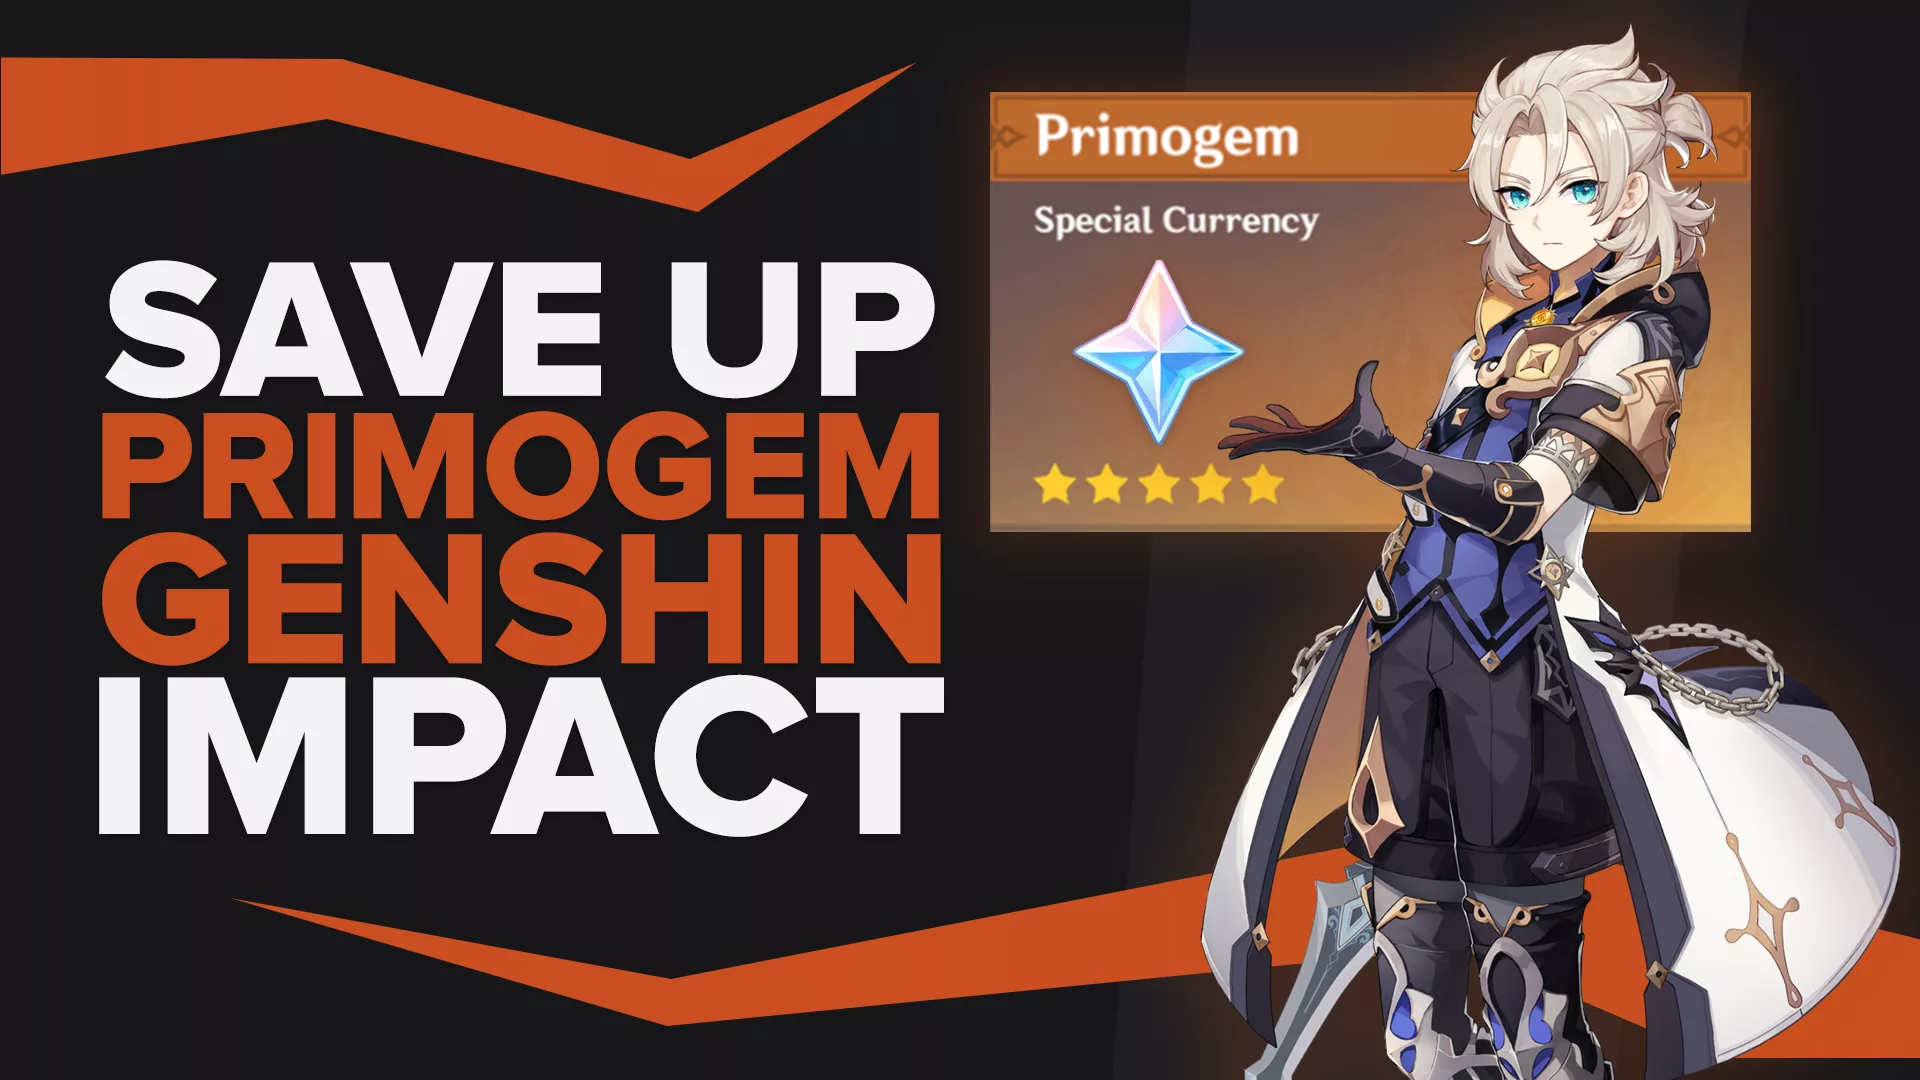 How to Save Up Primogems in Genshin Impact?